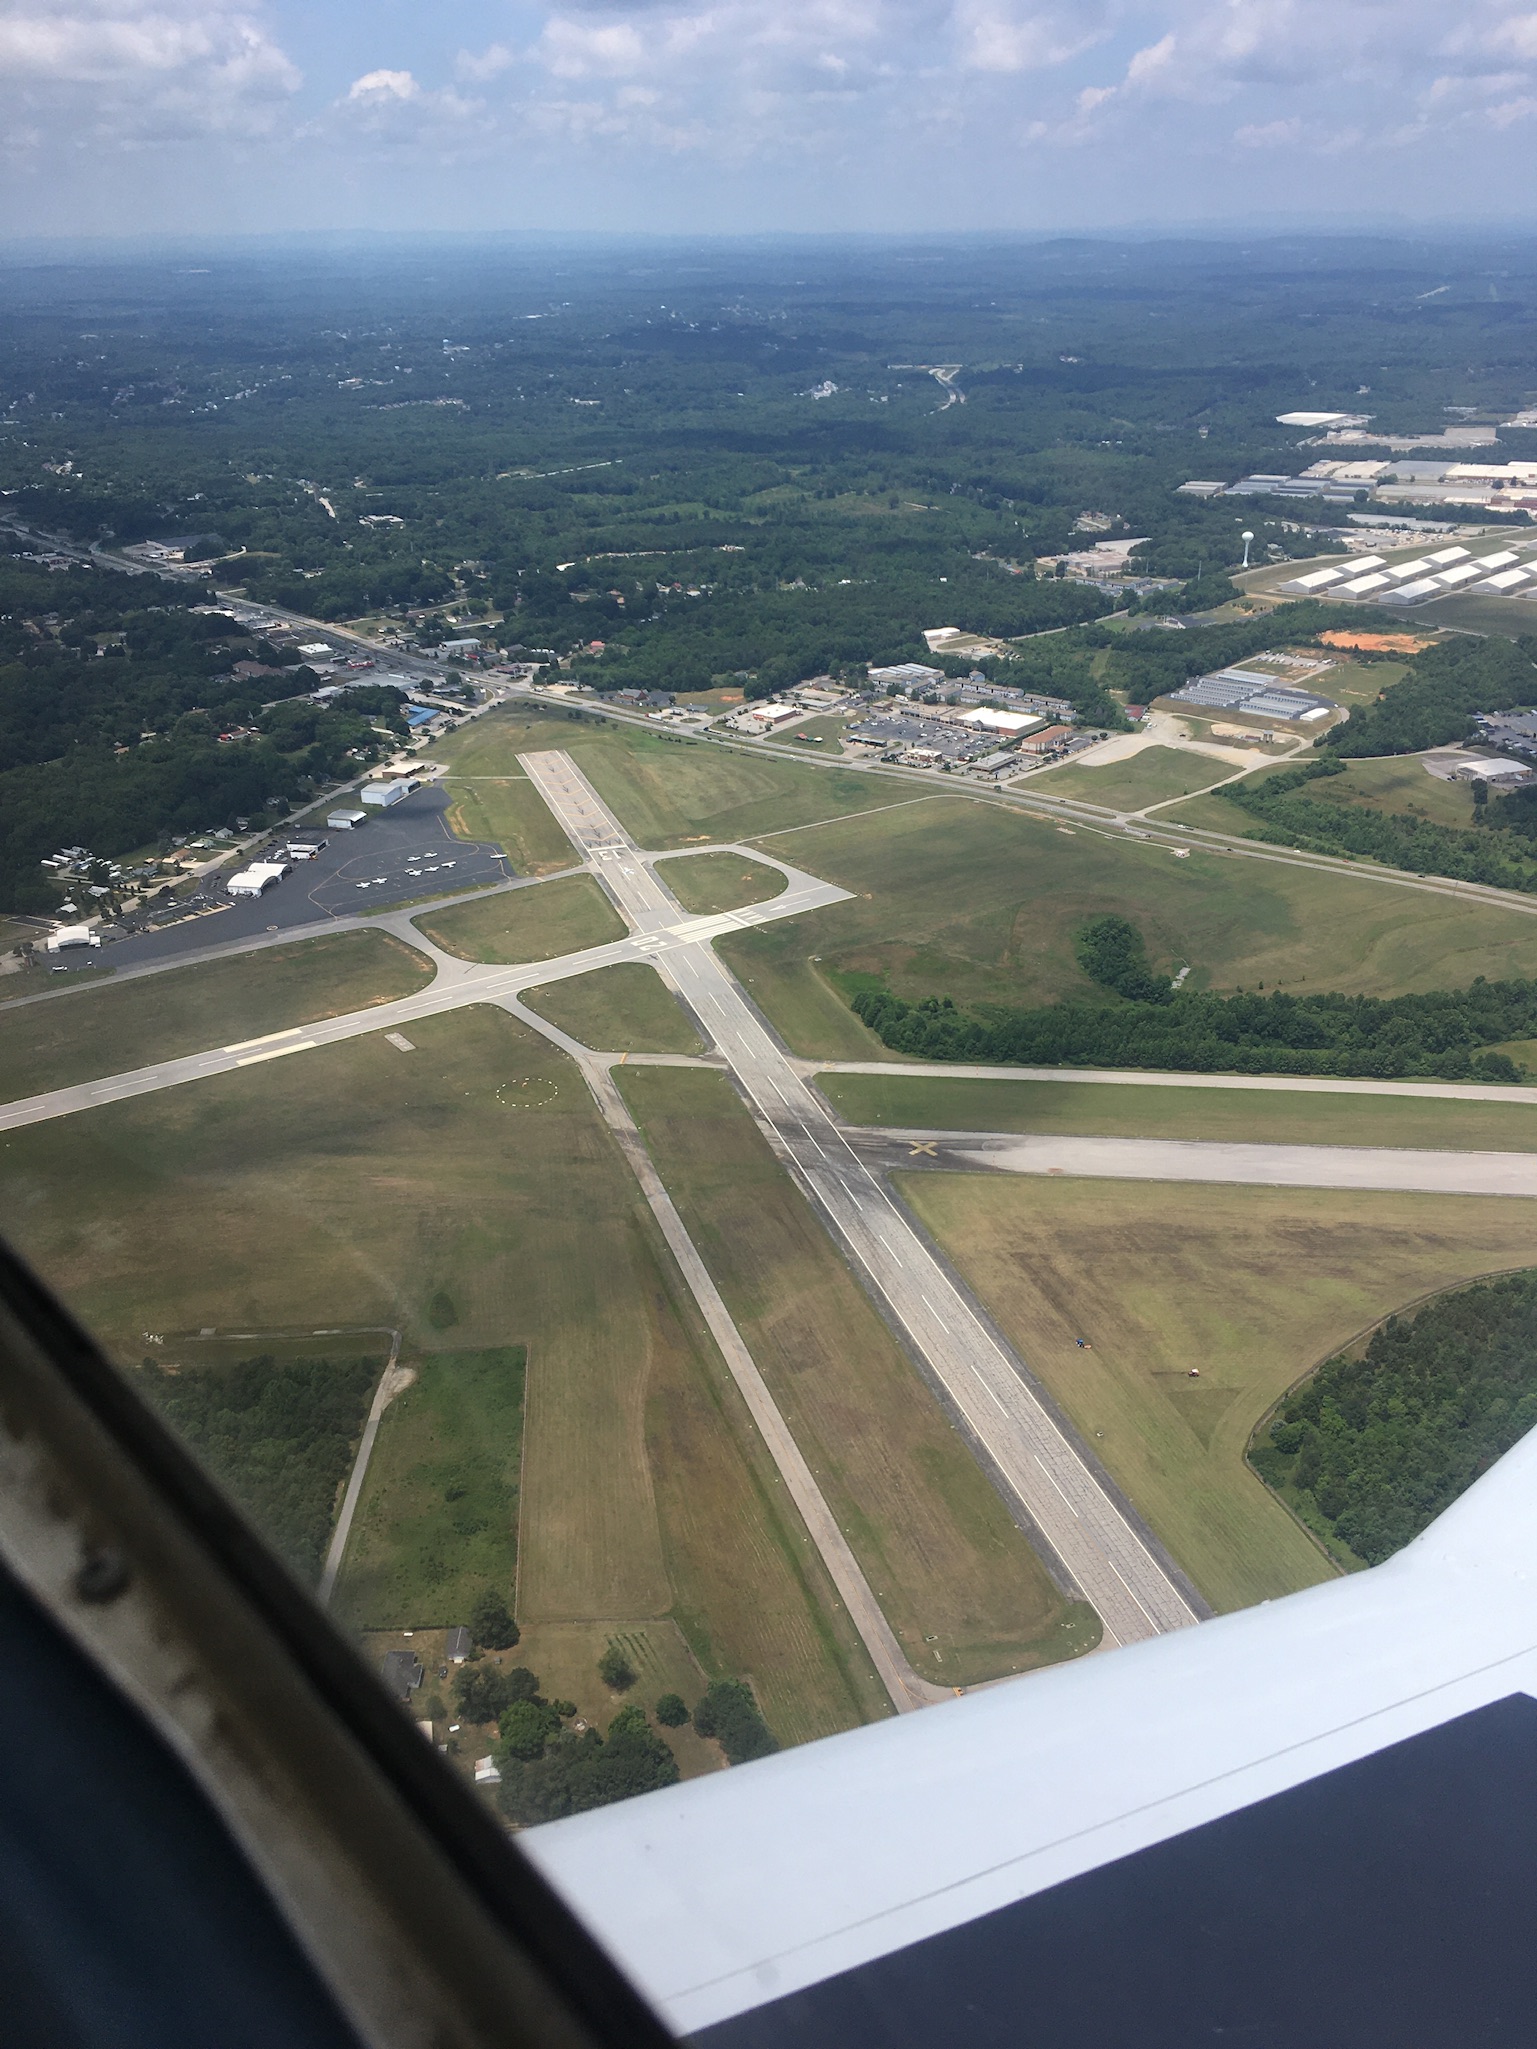 Danville, Virginia airport, from above.